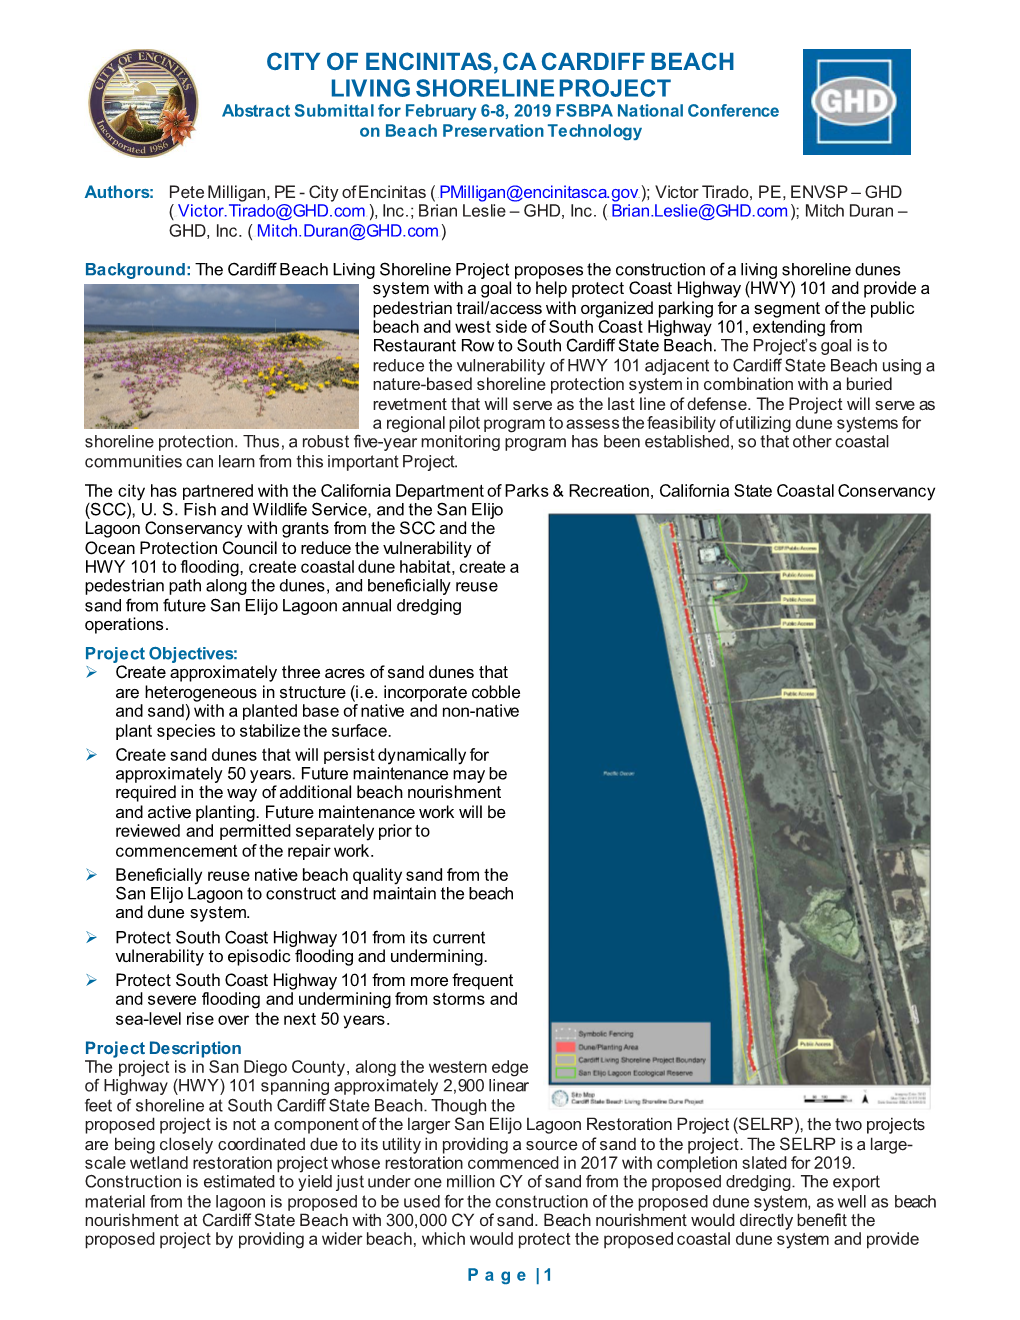 CITY of ENCINITAS, CA CARDIFF BEACH LIVING SHORELINE PROJECT Abstract Submittal for February 6-8, 2019 FSBPA National Conference on Beach Preservation Technology